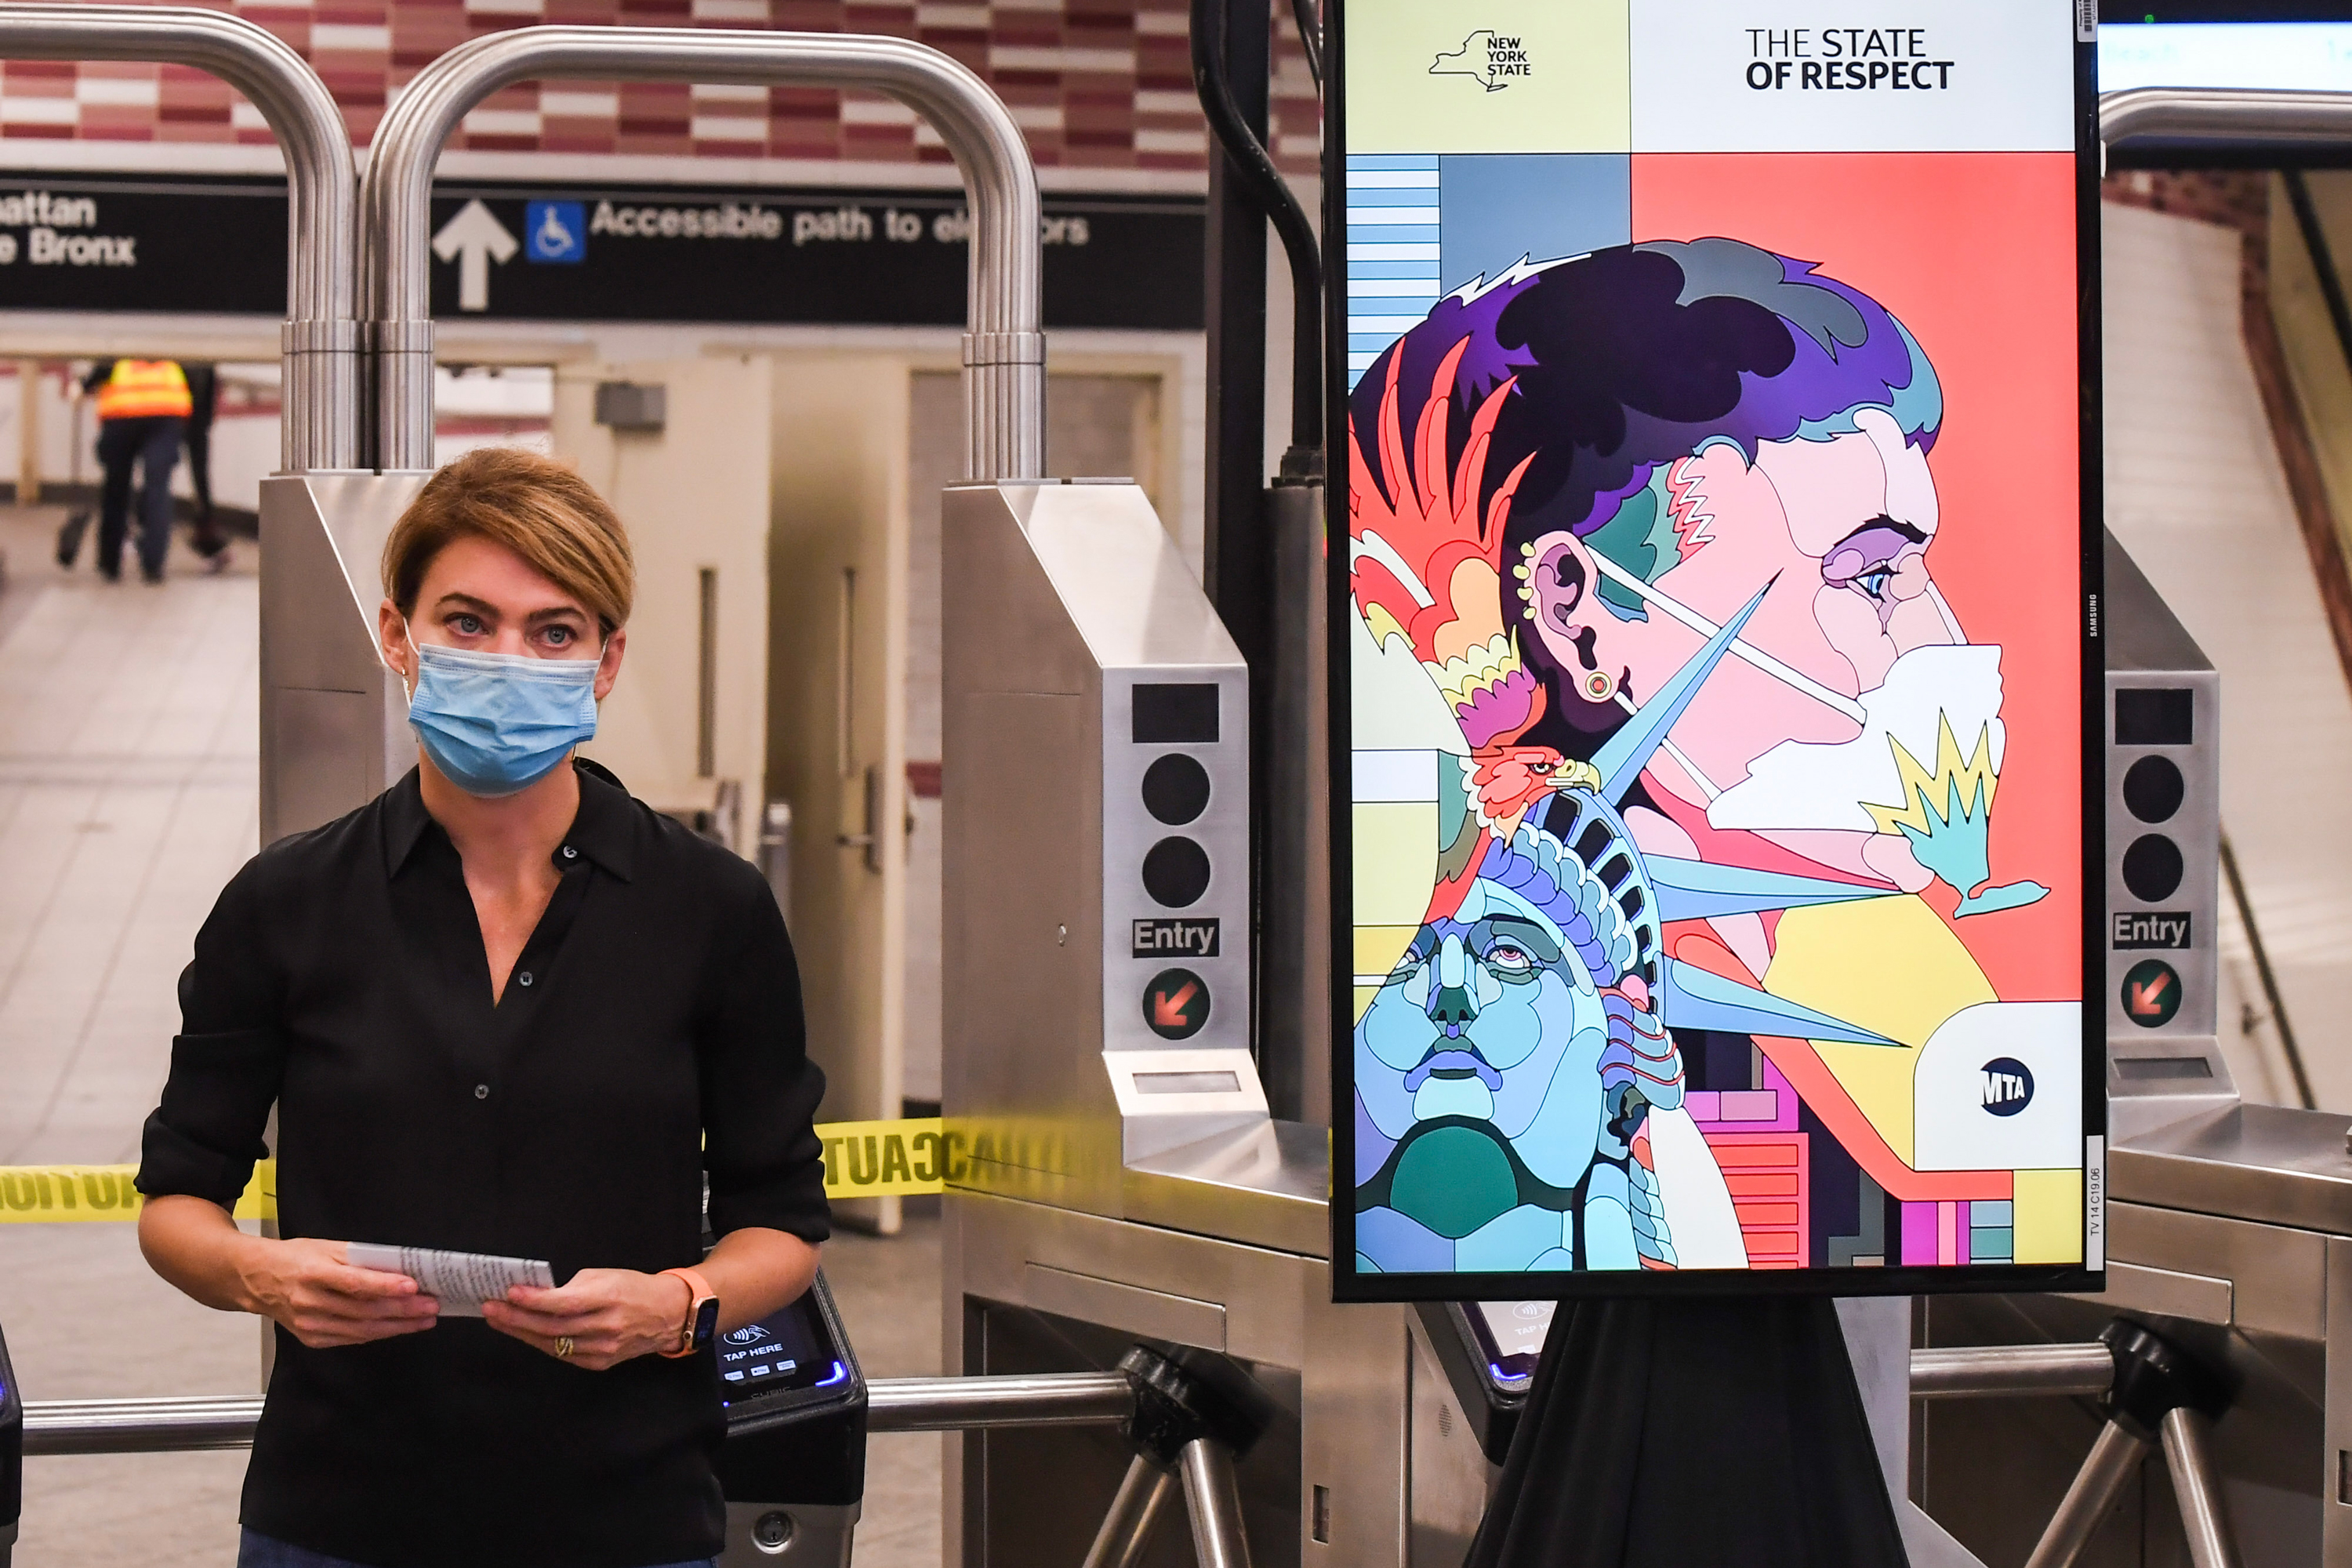 New York City Transit President Sarah Feinberg stands next to a video screen Atlantic Avenue-Barclays station in Brooklyn during a news conference to promote mask wearing, Sept. 14, 2020.